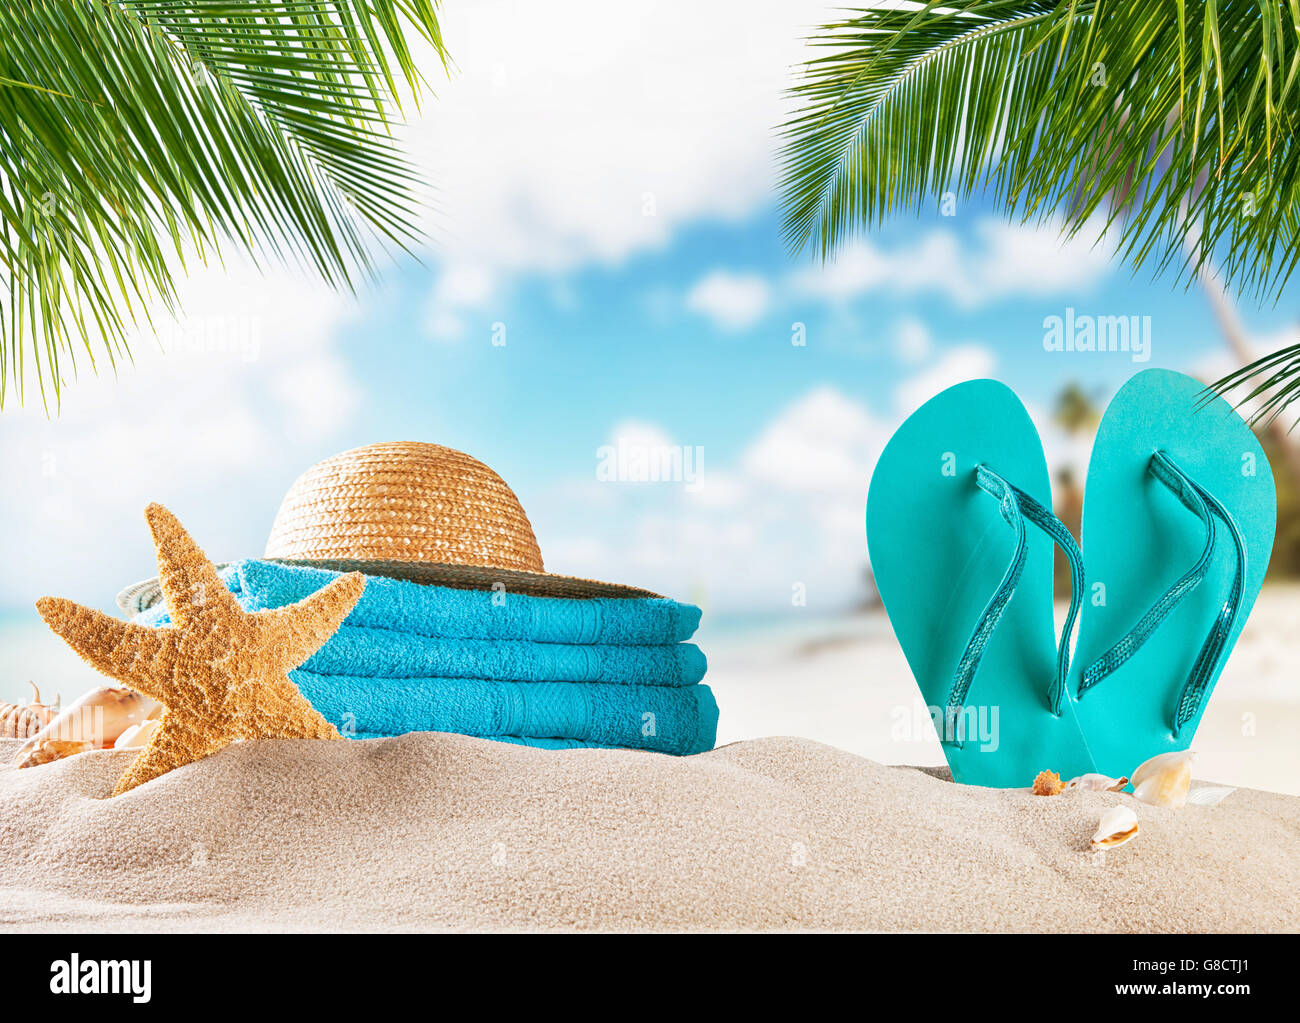 Summer accessories on sandy beach, blur sea on background. Summer exotic relaxation concept Stock Photo